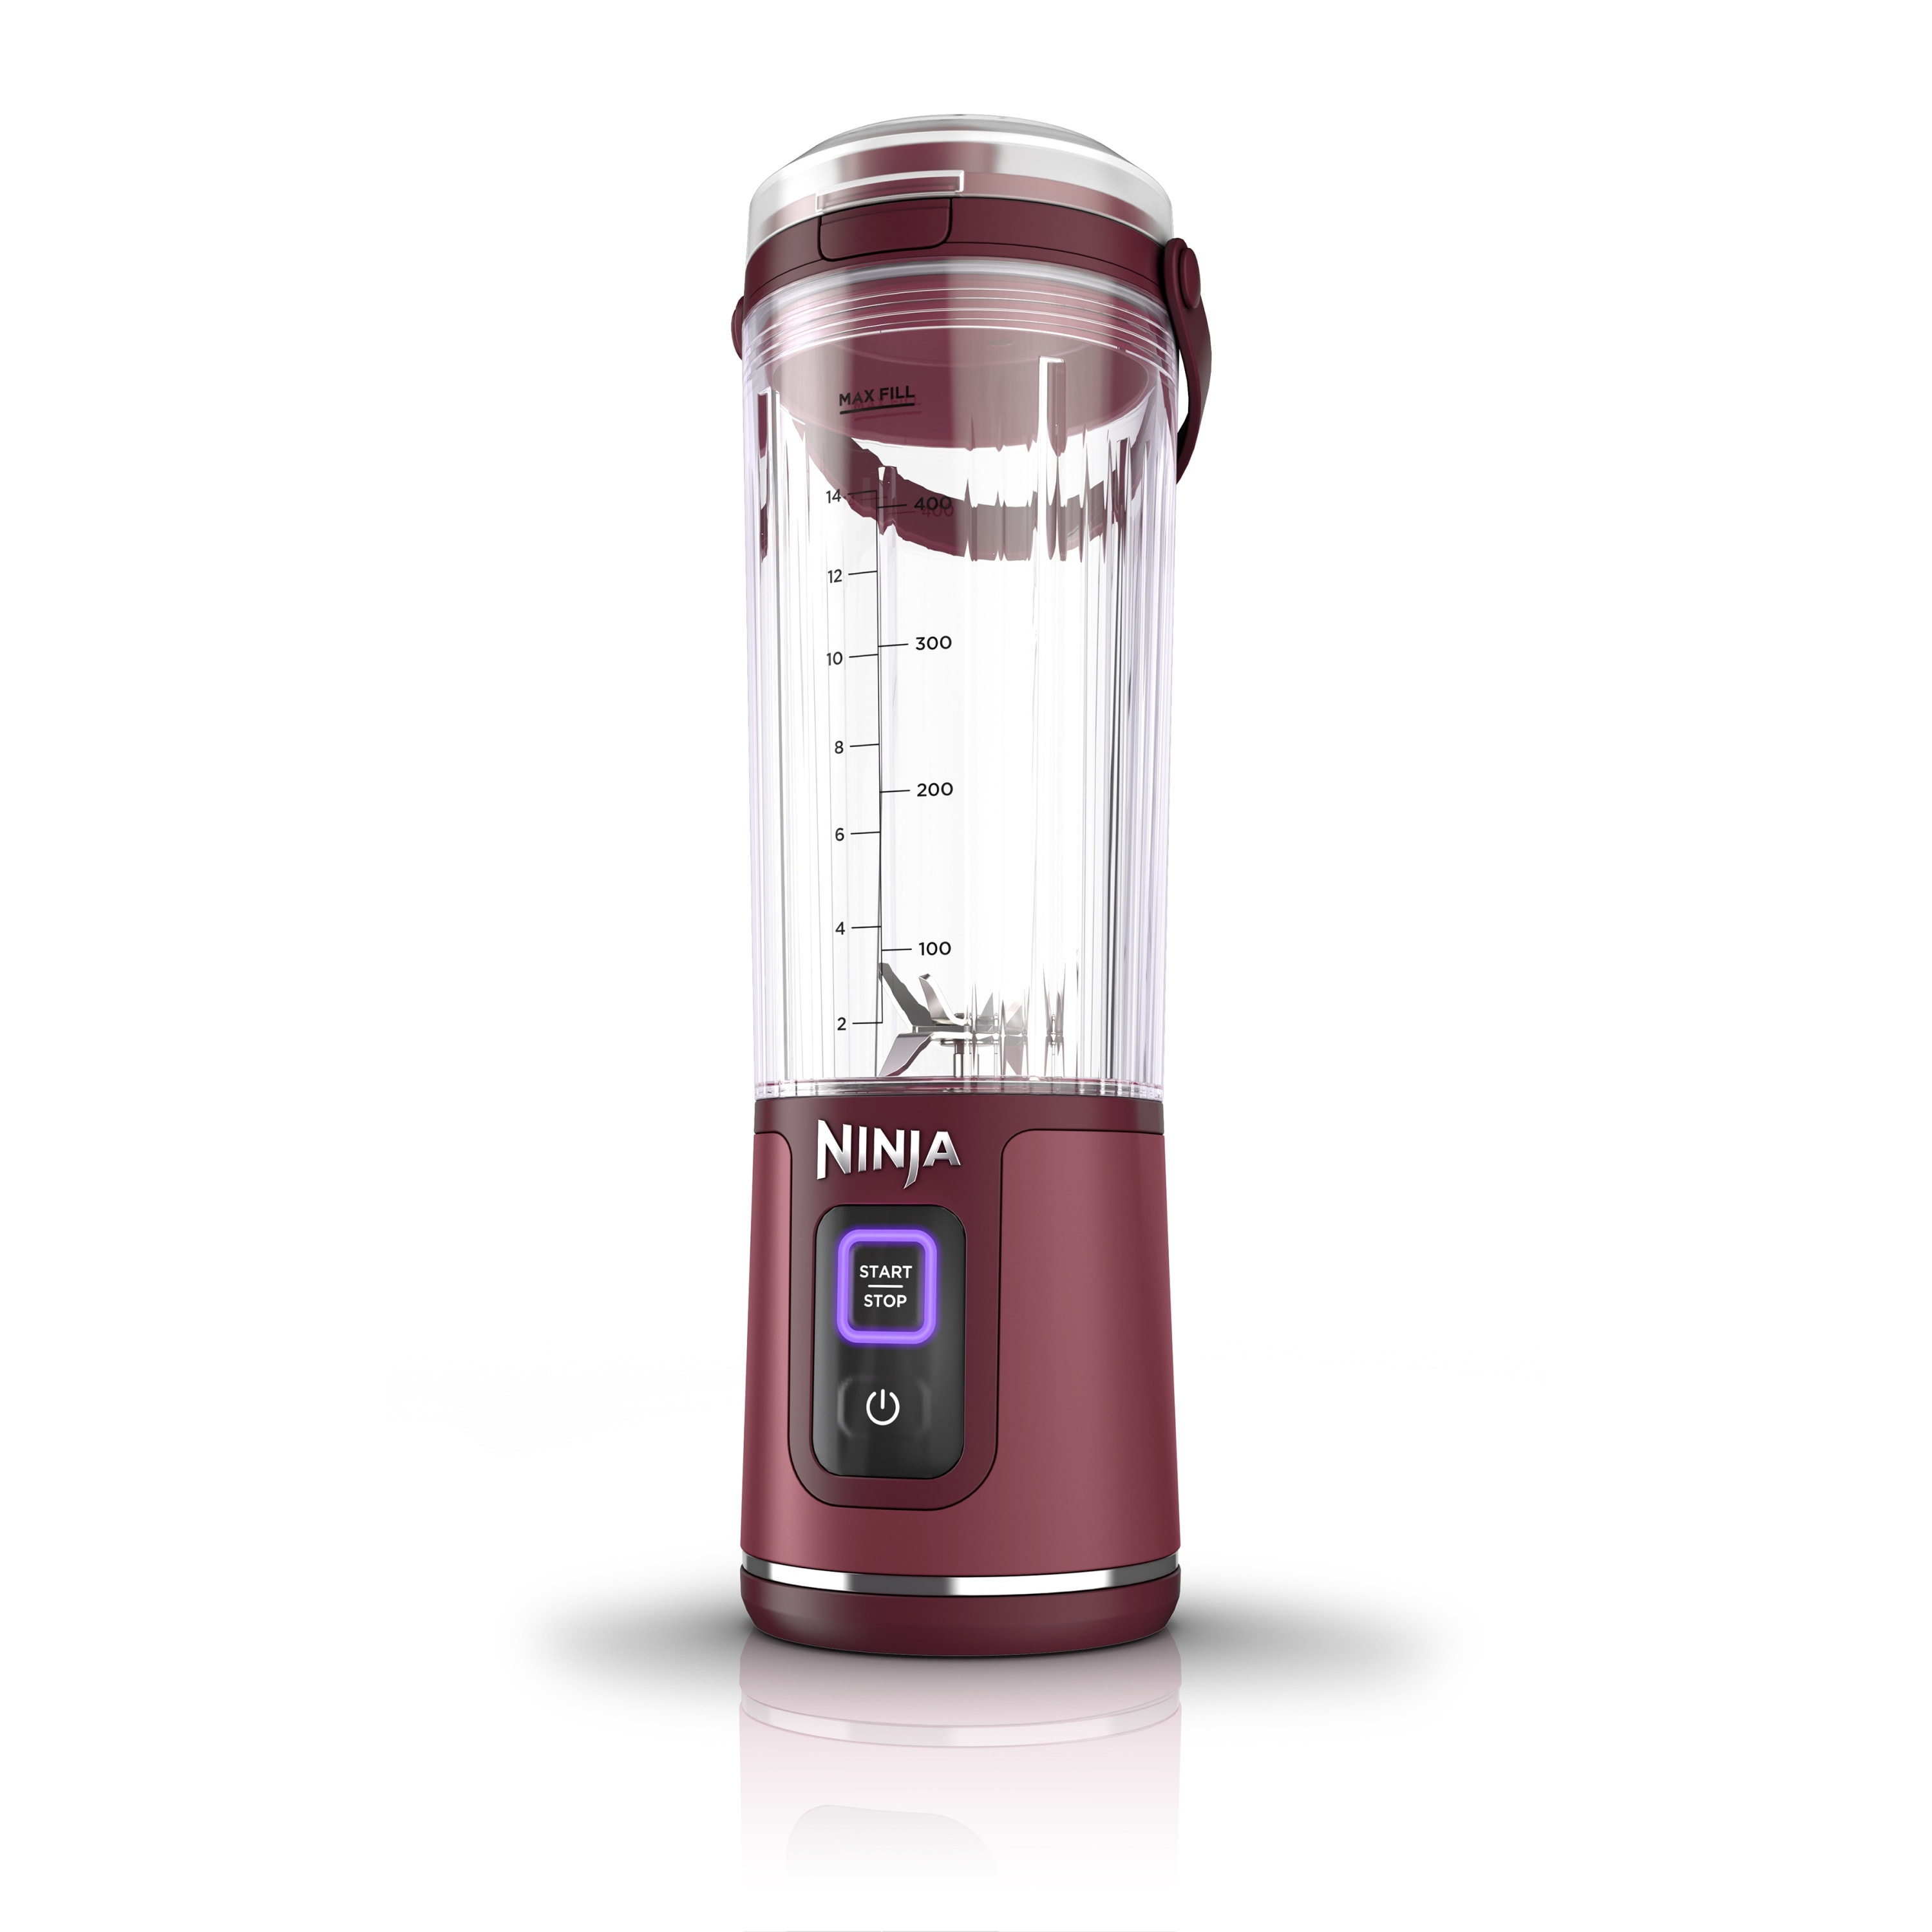 https://ak1.ostkcdn.com/images/products/is/images/direct/a977a82df4c838693bfb5bf01755193e0f30b14f/Ninja-Blast-Portable-Blender%2C-Cordless%2C-18oz.-Vessel%2C-USB-C-Rechargeable.jpg